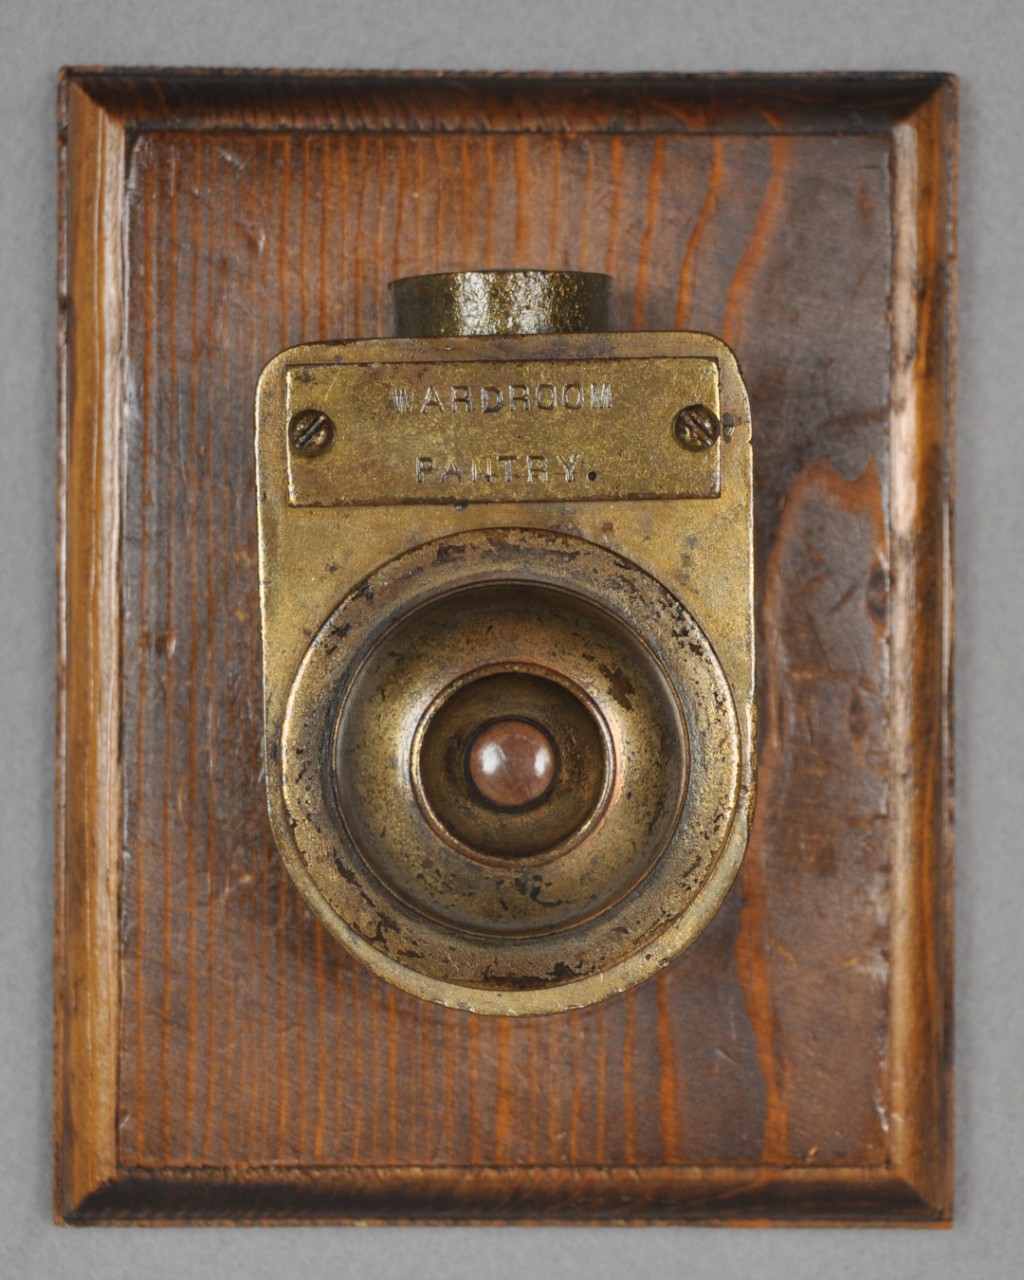 <p>A small brass box with a raised circular button in the middle. Above the circular button is a brass tag with the words “Wardroom Pantry” stamped into it. At the top of the brass box is a small circular tube for cable to run through. It is mounted on a square wooden board.</p>
